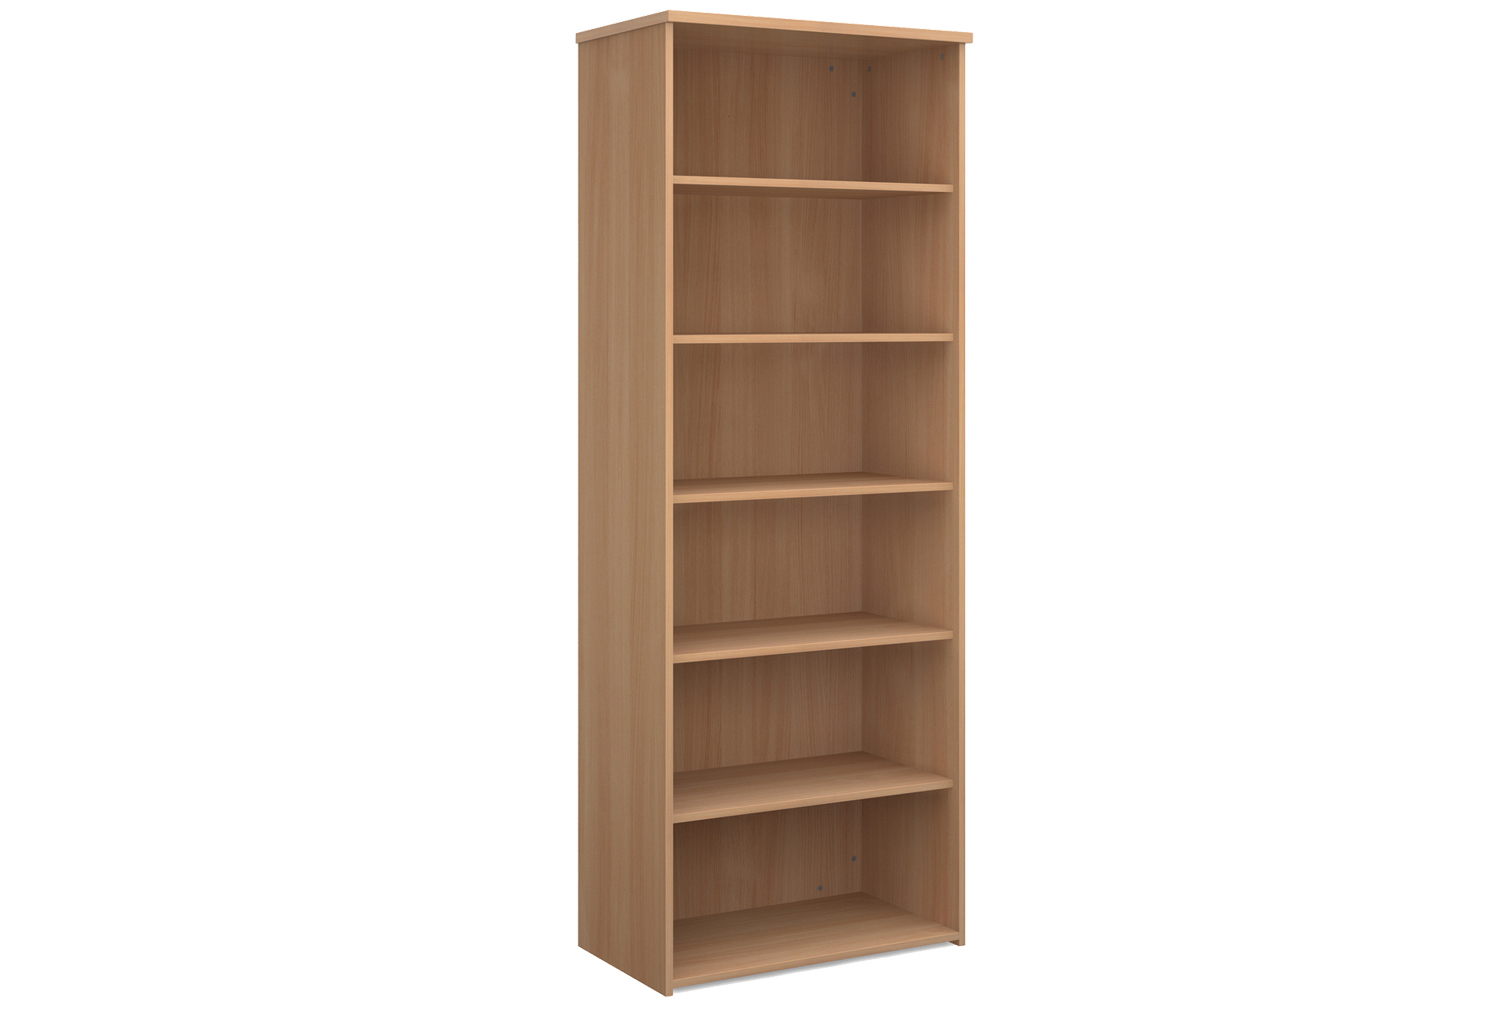 Value Line Office Bookcases, 5 Shelf - 80wx47dx214h (cm), Beech, Fully Installed